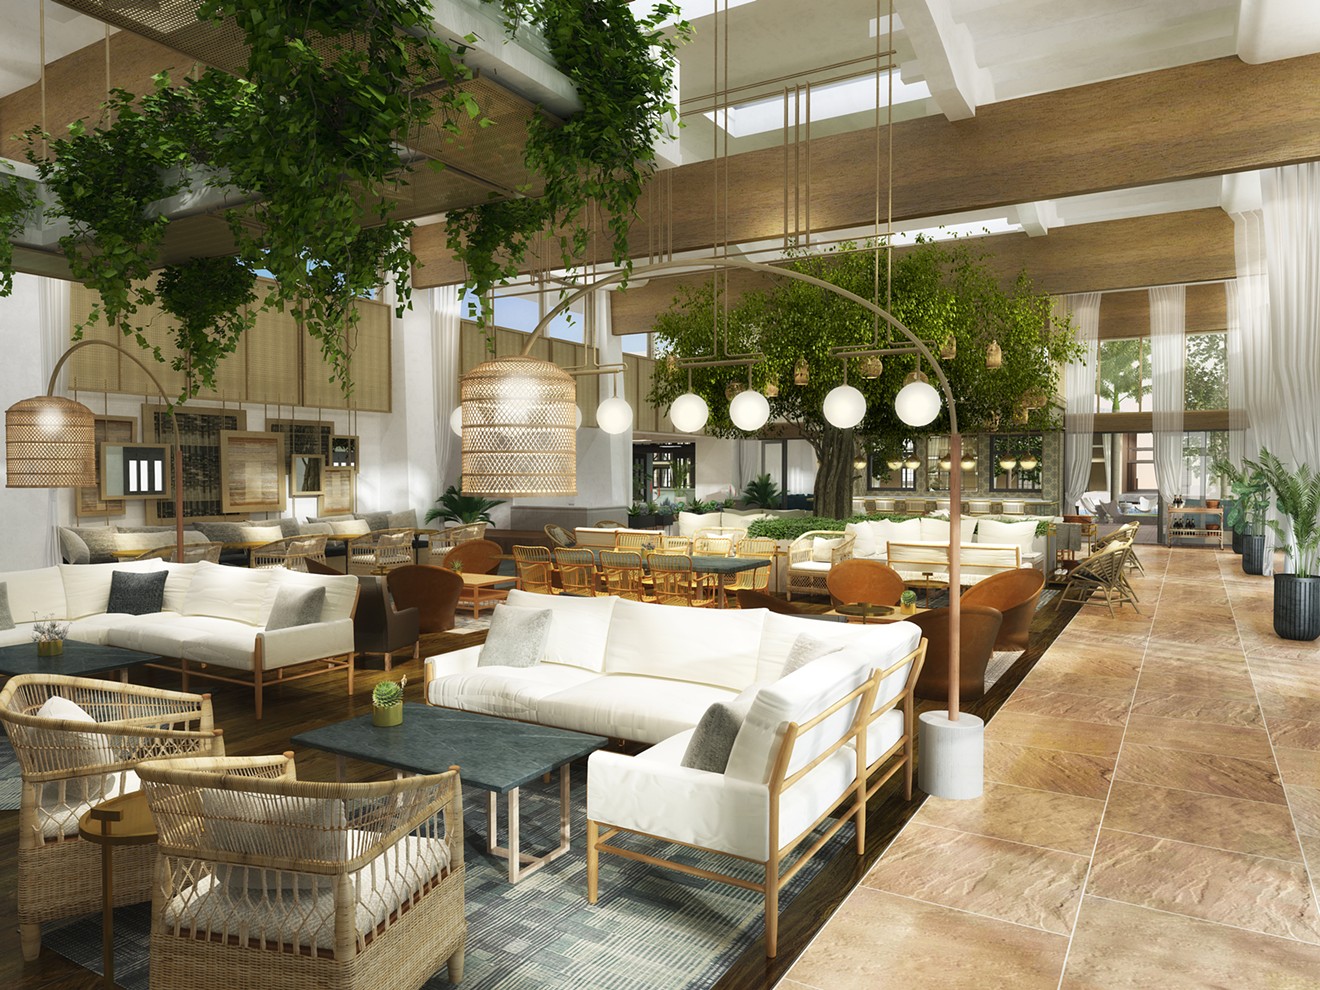 The lobby will go through a revamp to bring on the feel of a front porch in Havana.